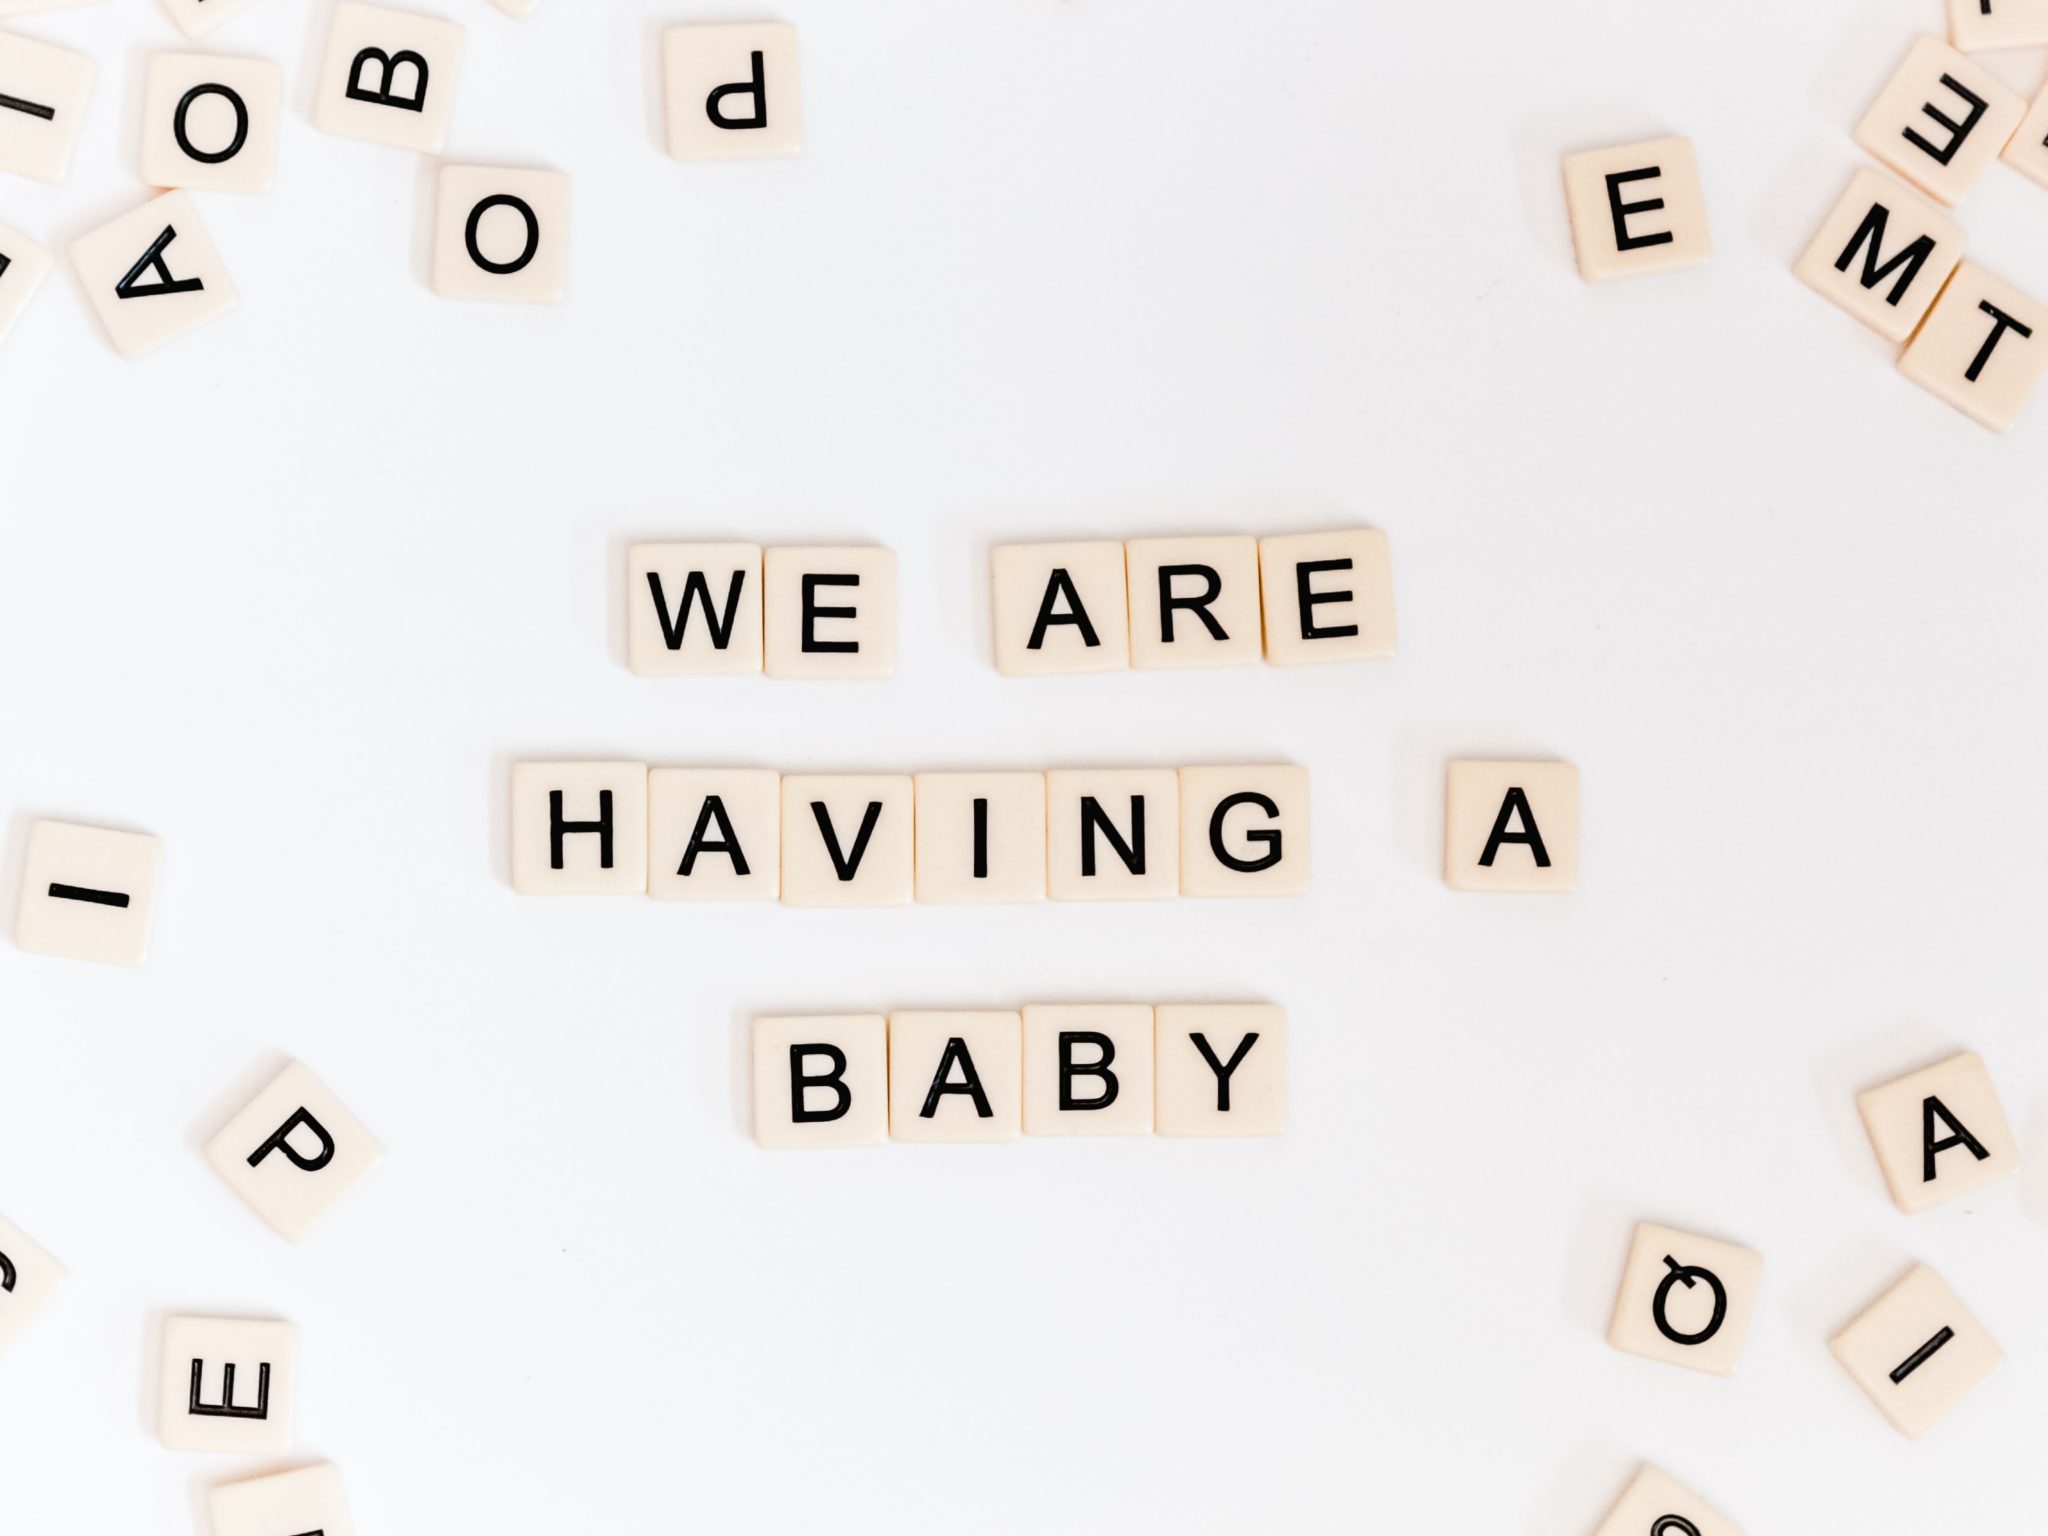 image of beige tiles spelling "we are having a baby" on a white background